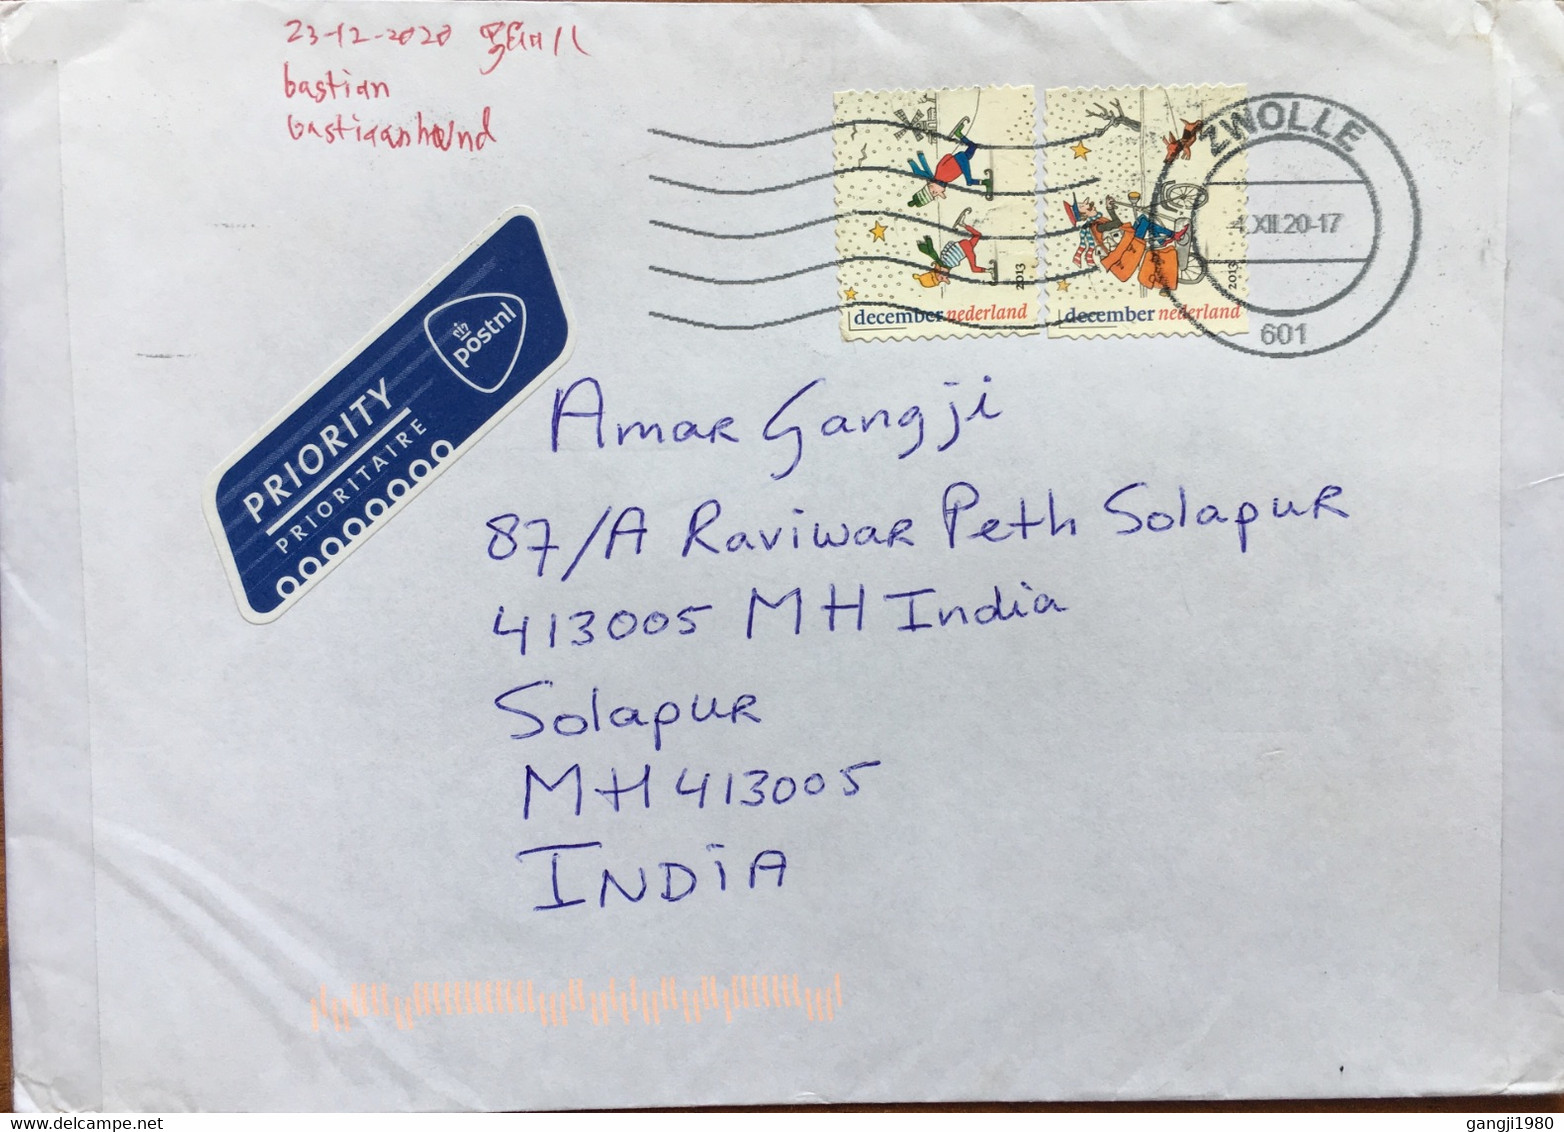 NEDERLAND 2020,CORONA PERIOUD ,POSTMAN ON BICYCLE!! CHILDEN SKATING IN WINTER 2013 STAMP USED AIRMAIL COVER TO INDIA , - Covers & Documents